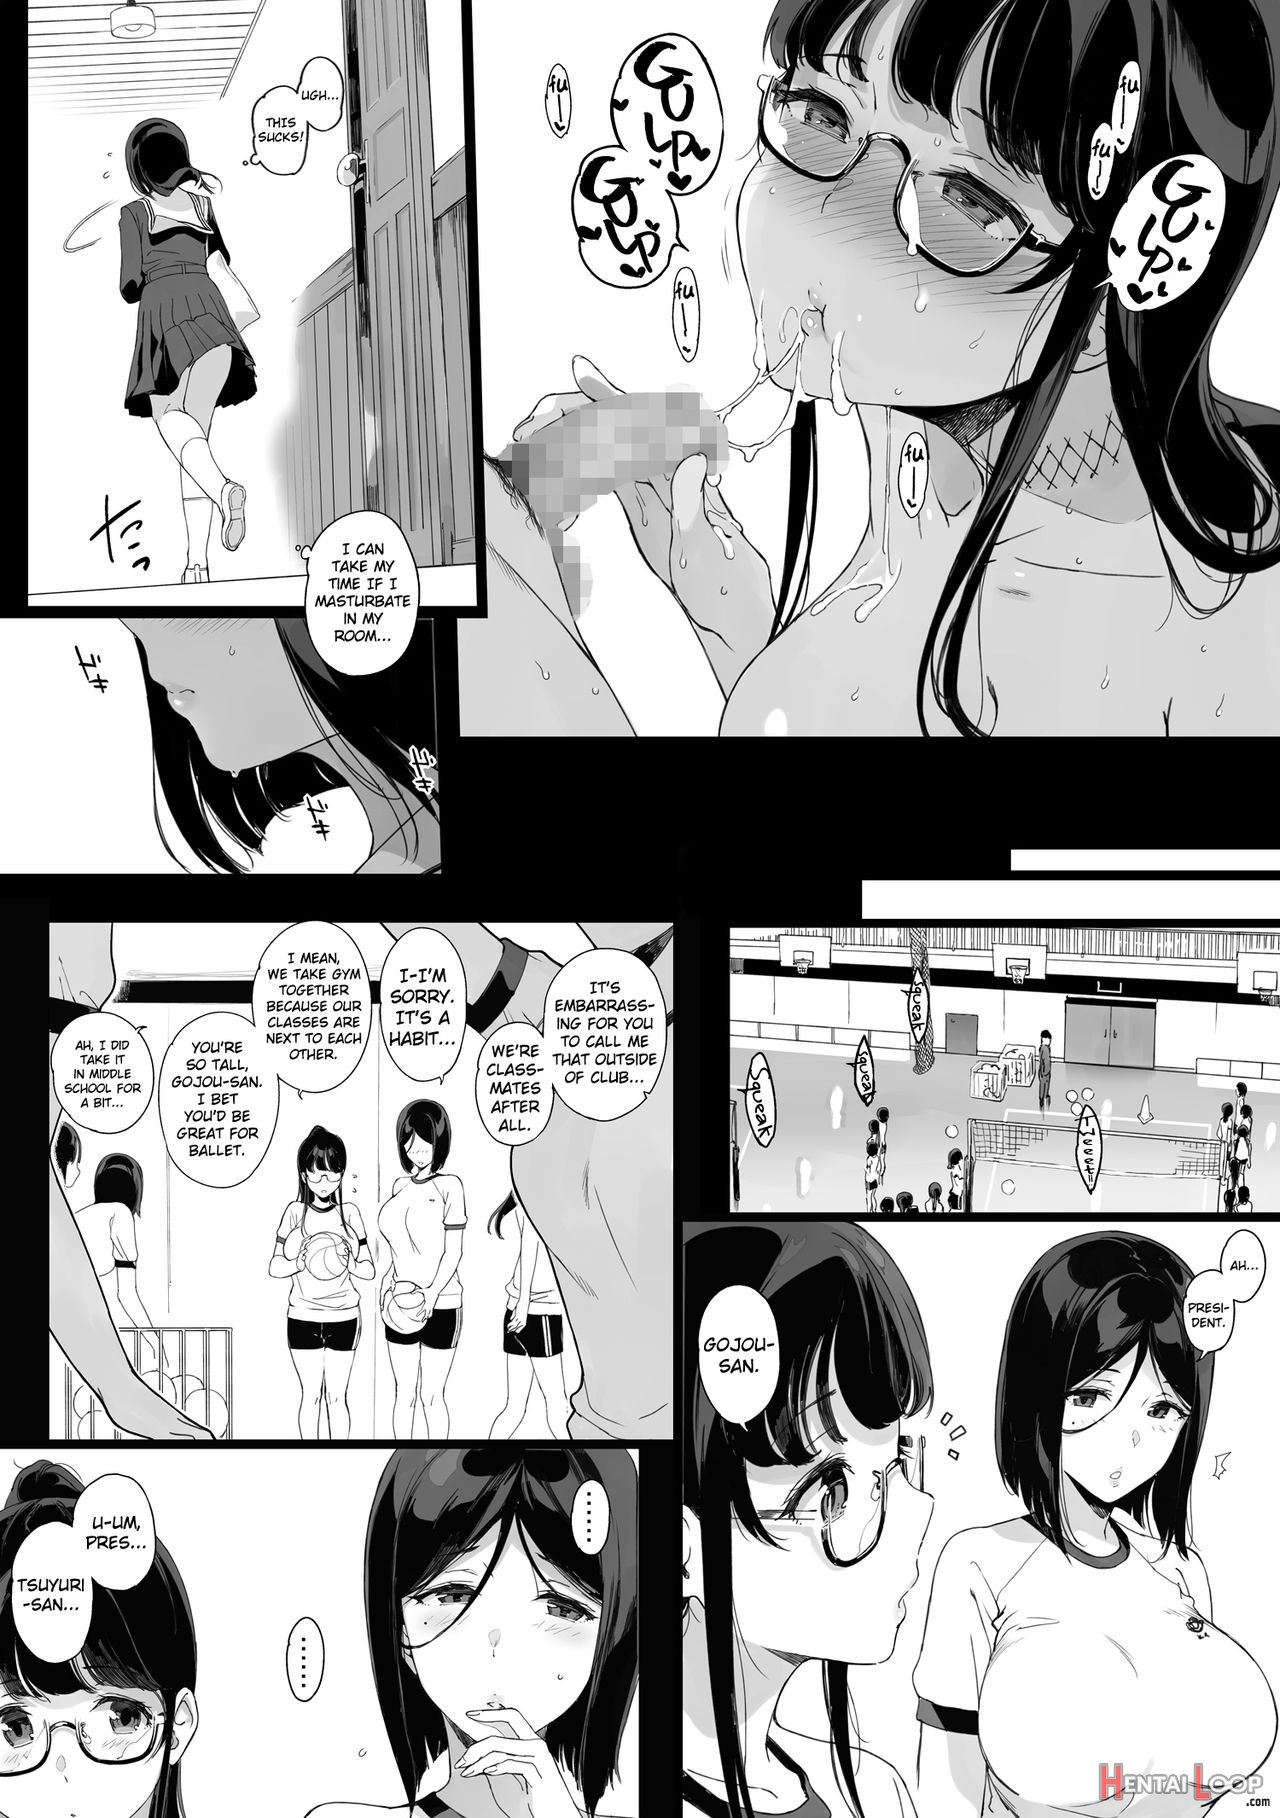 What My Senpai Does For Me 2 page 11